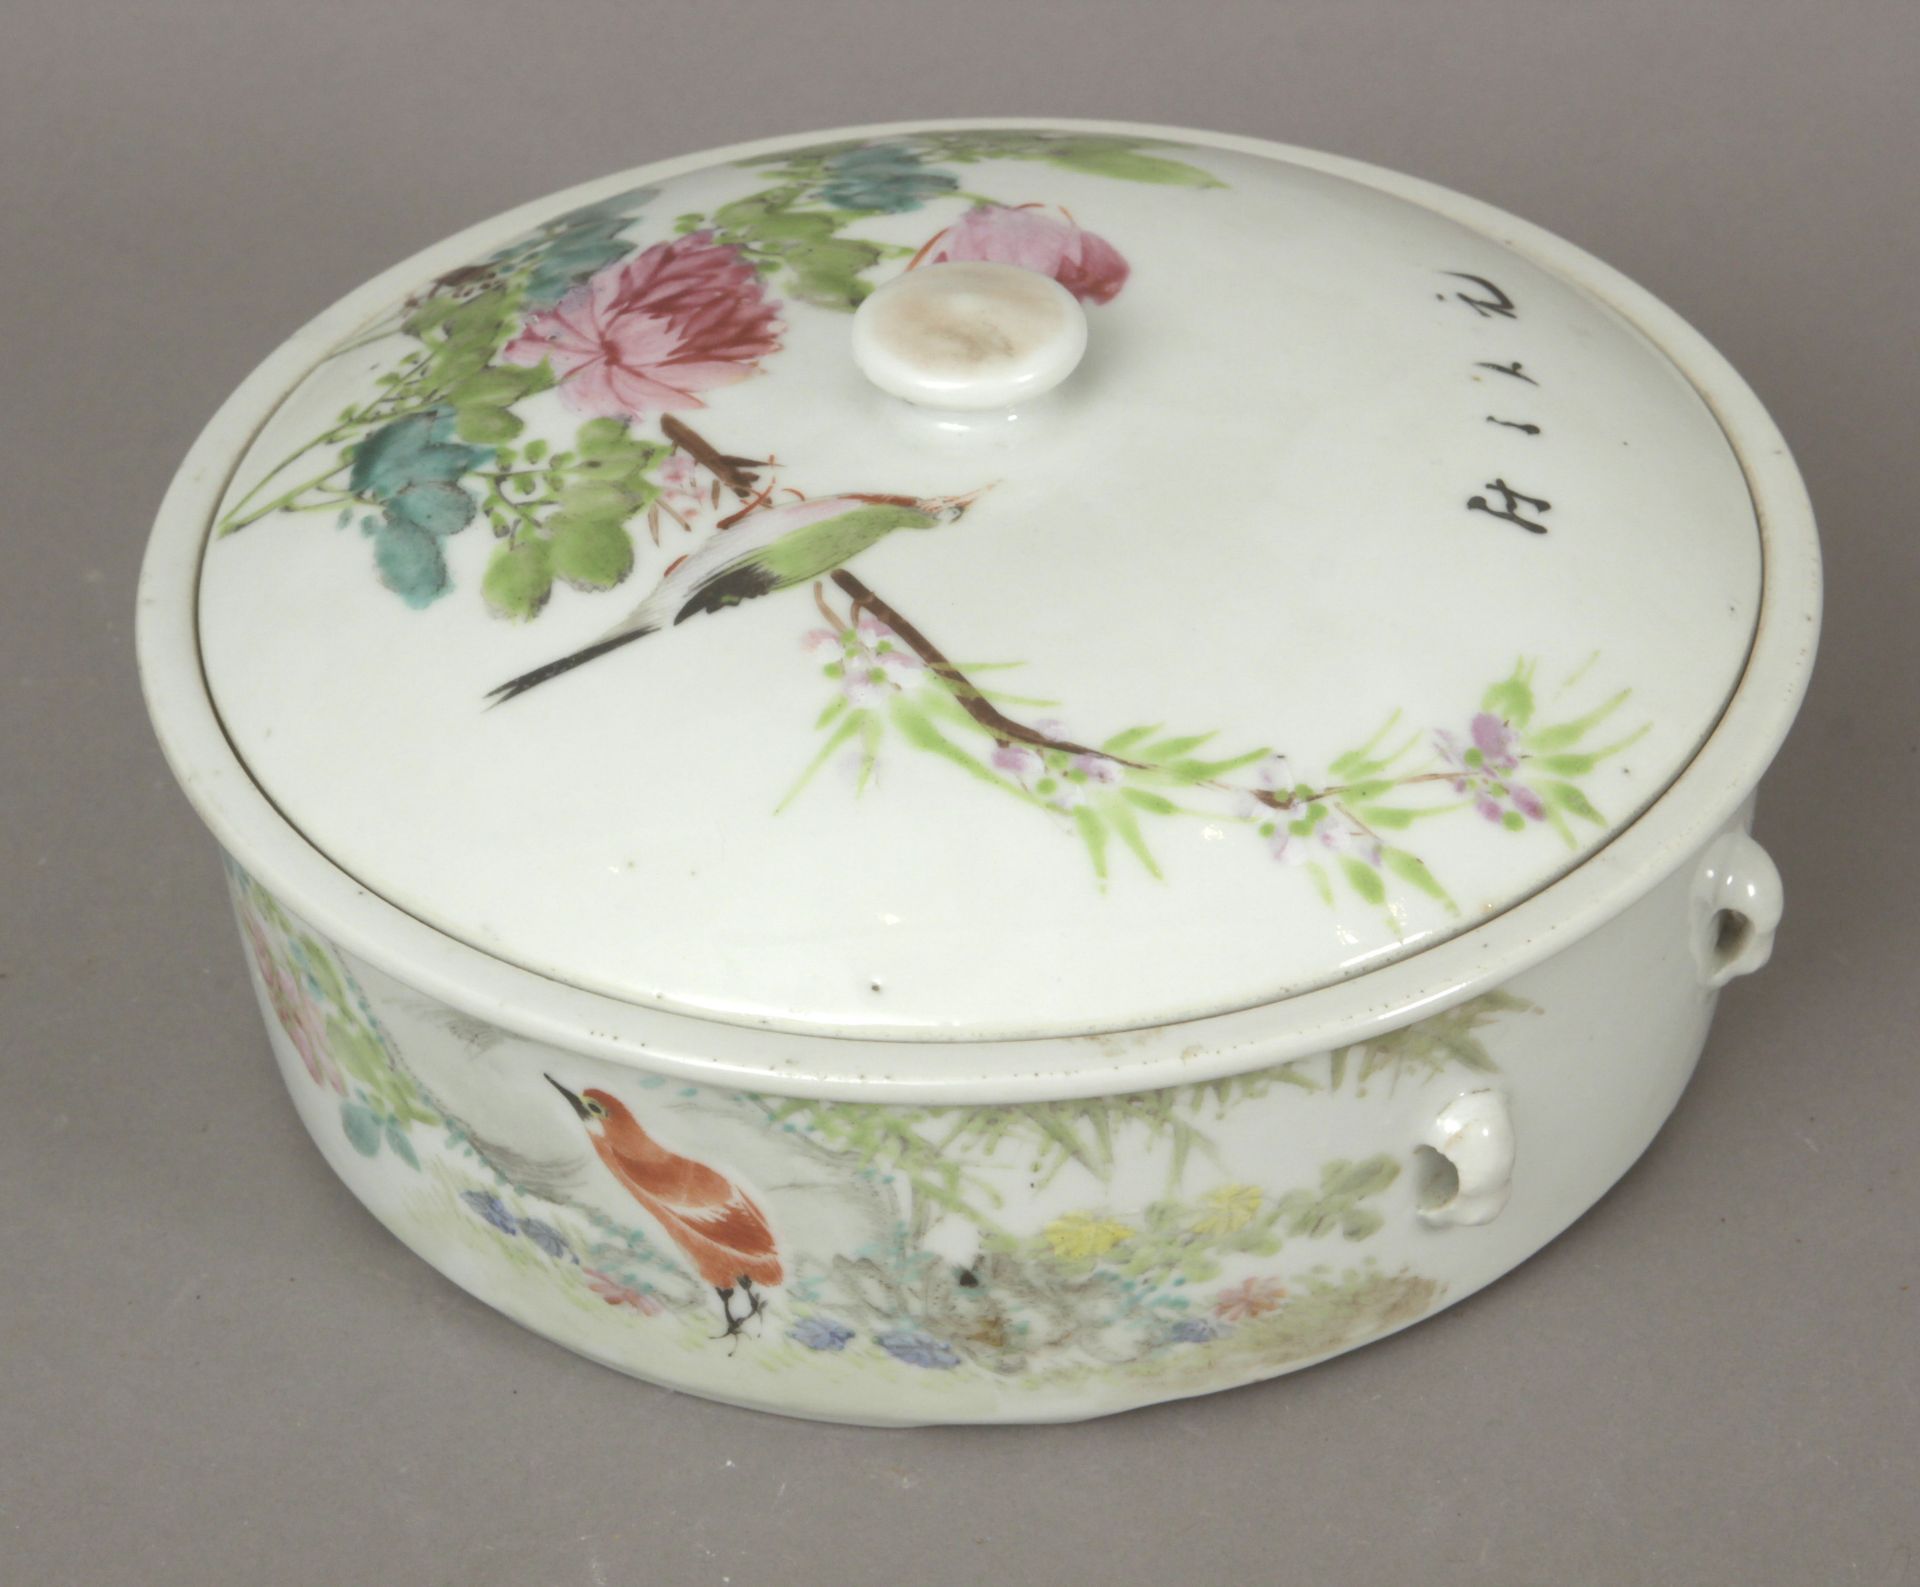 A 20th century Chinese legume container in Famille Rose porcelain - Image 3 of 4